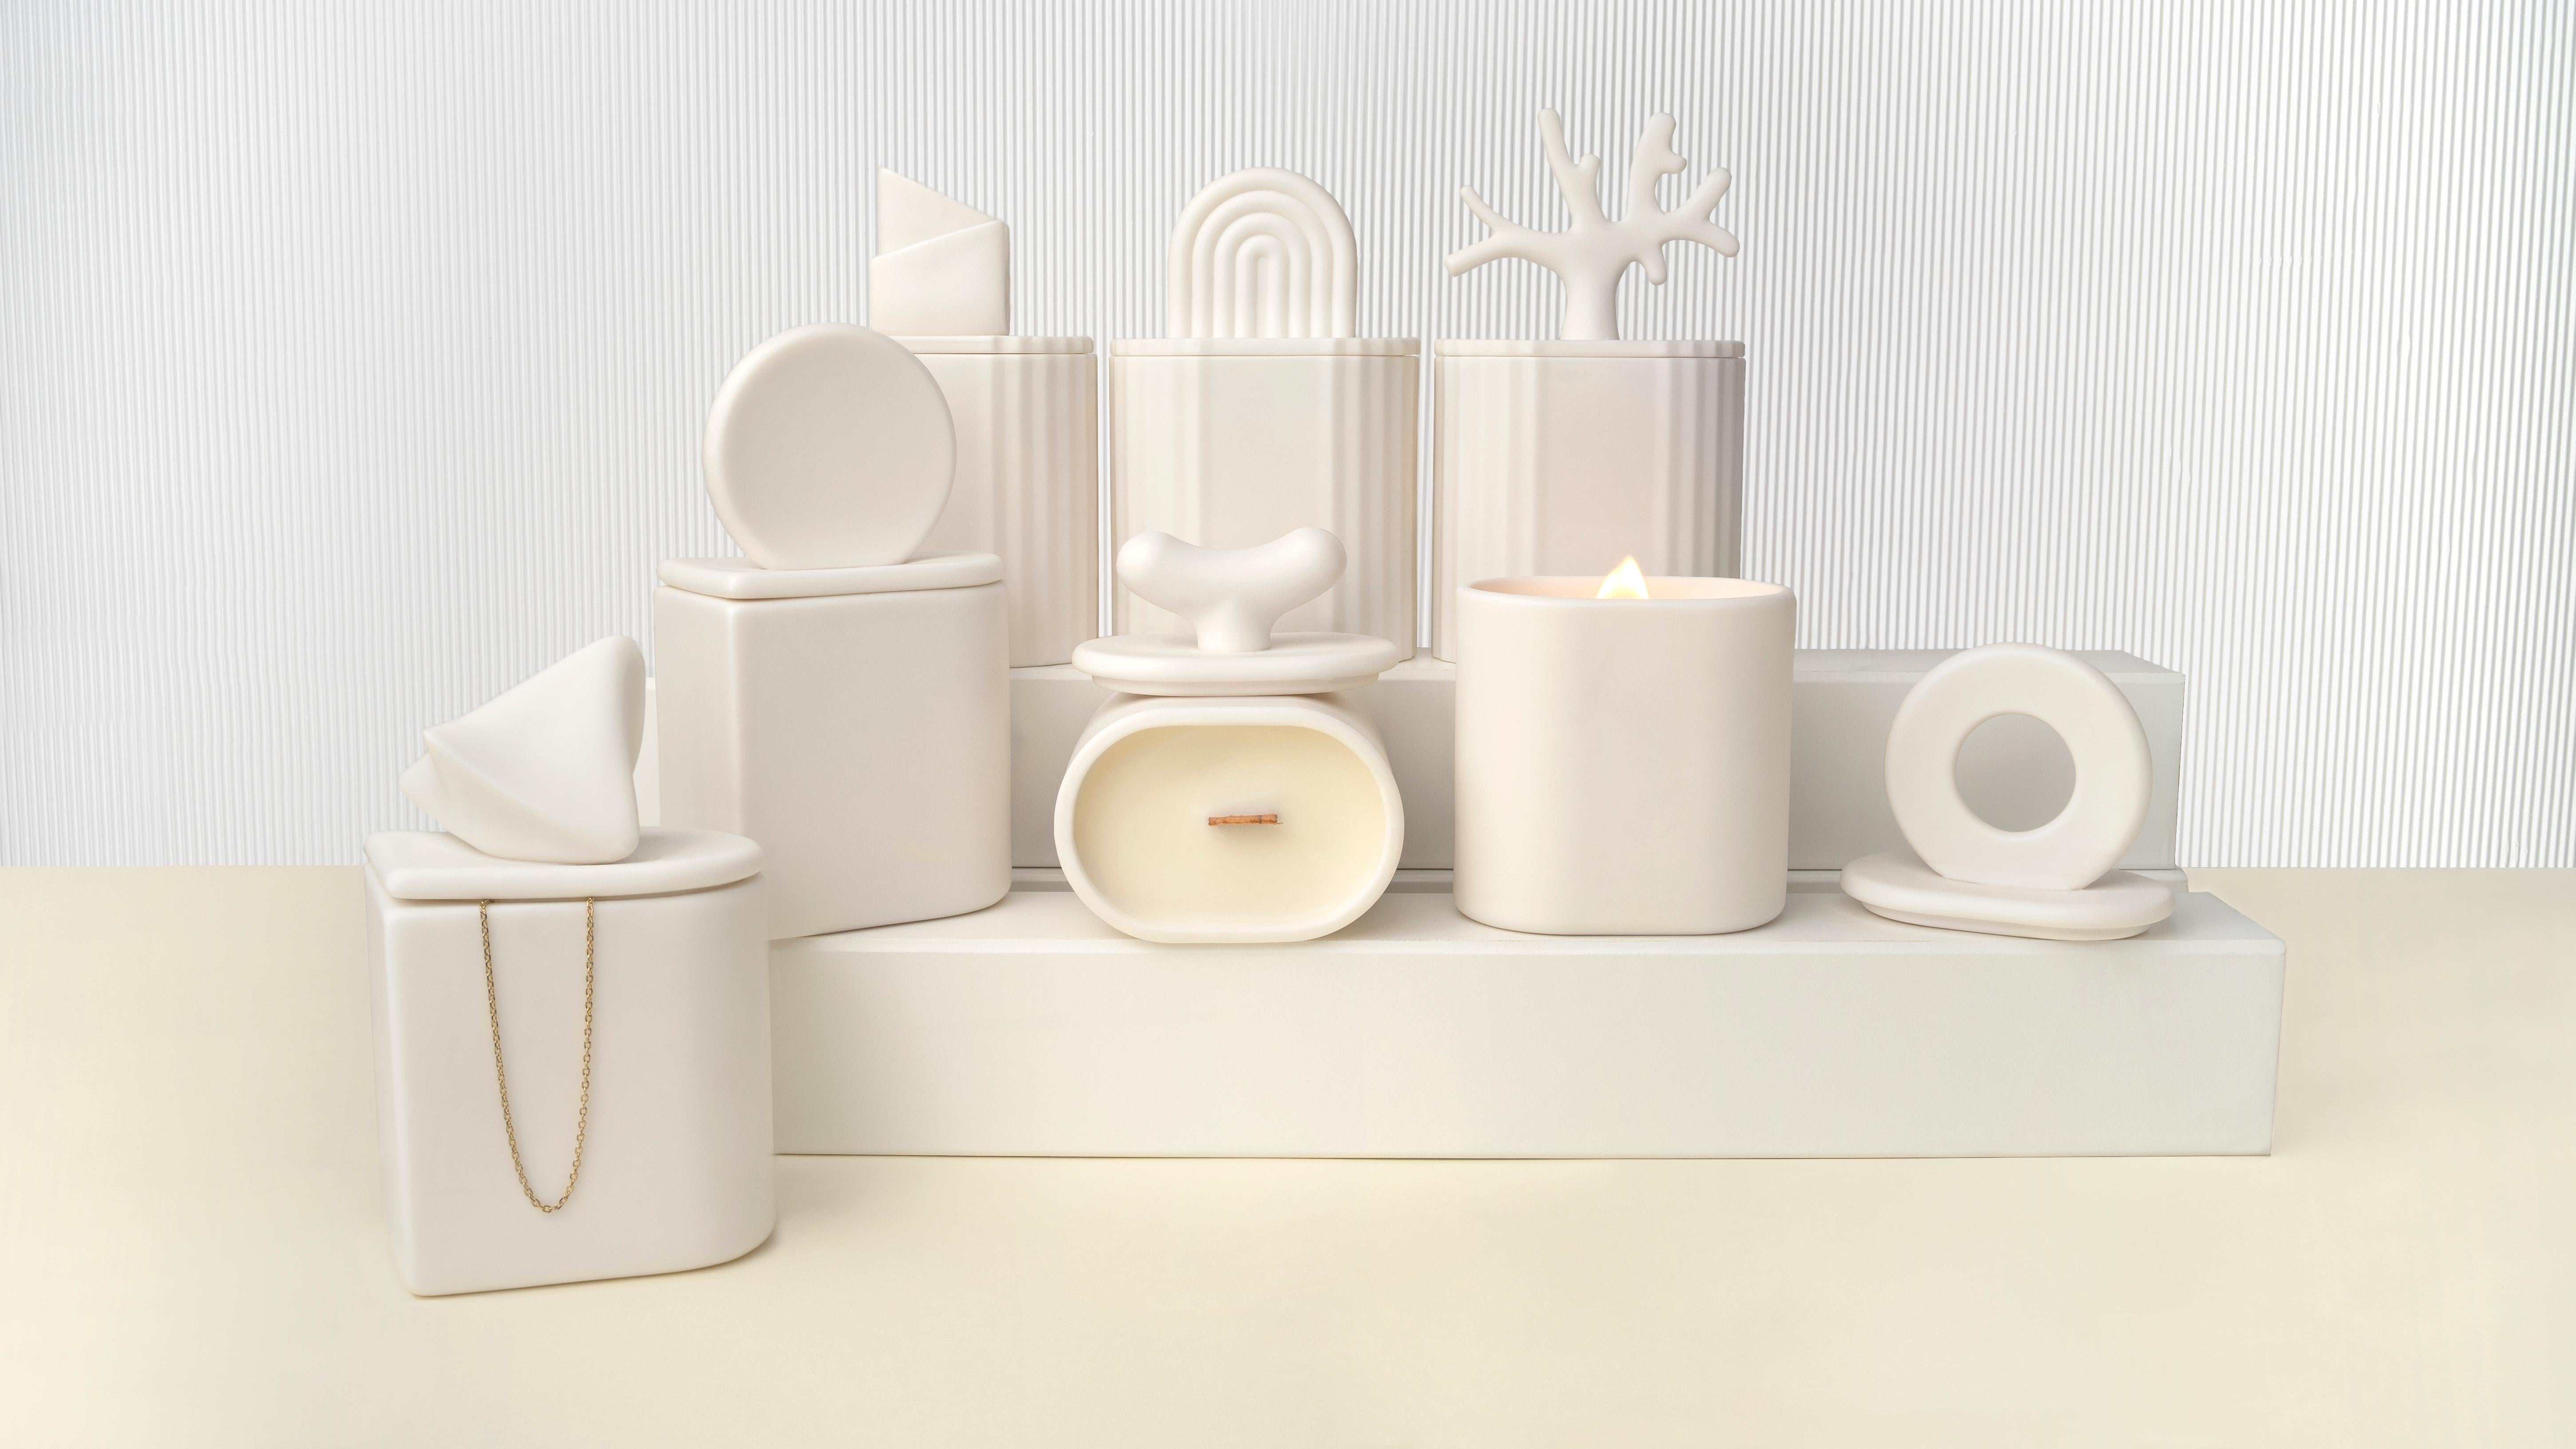 Arco Iris - minimalist ceramic container, Parian porcelain. 

A collection inspired by nature and classical forms.

Parian porcelain vessels, unglazed.

• 160 g natural soy wax

• app 30 h burn time

• wooden wick

• fragrance oils composition

•